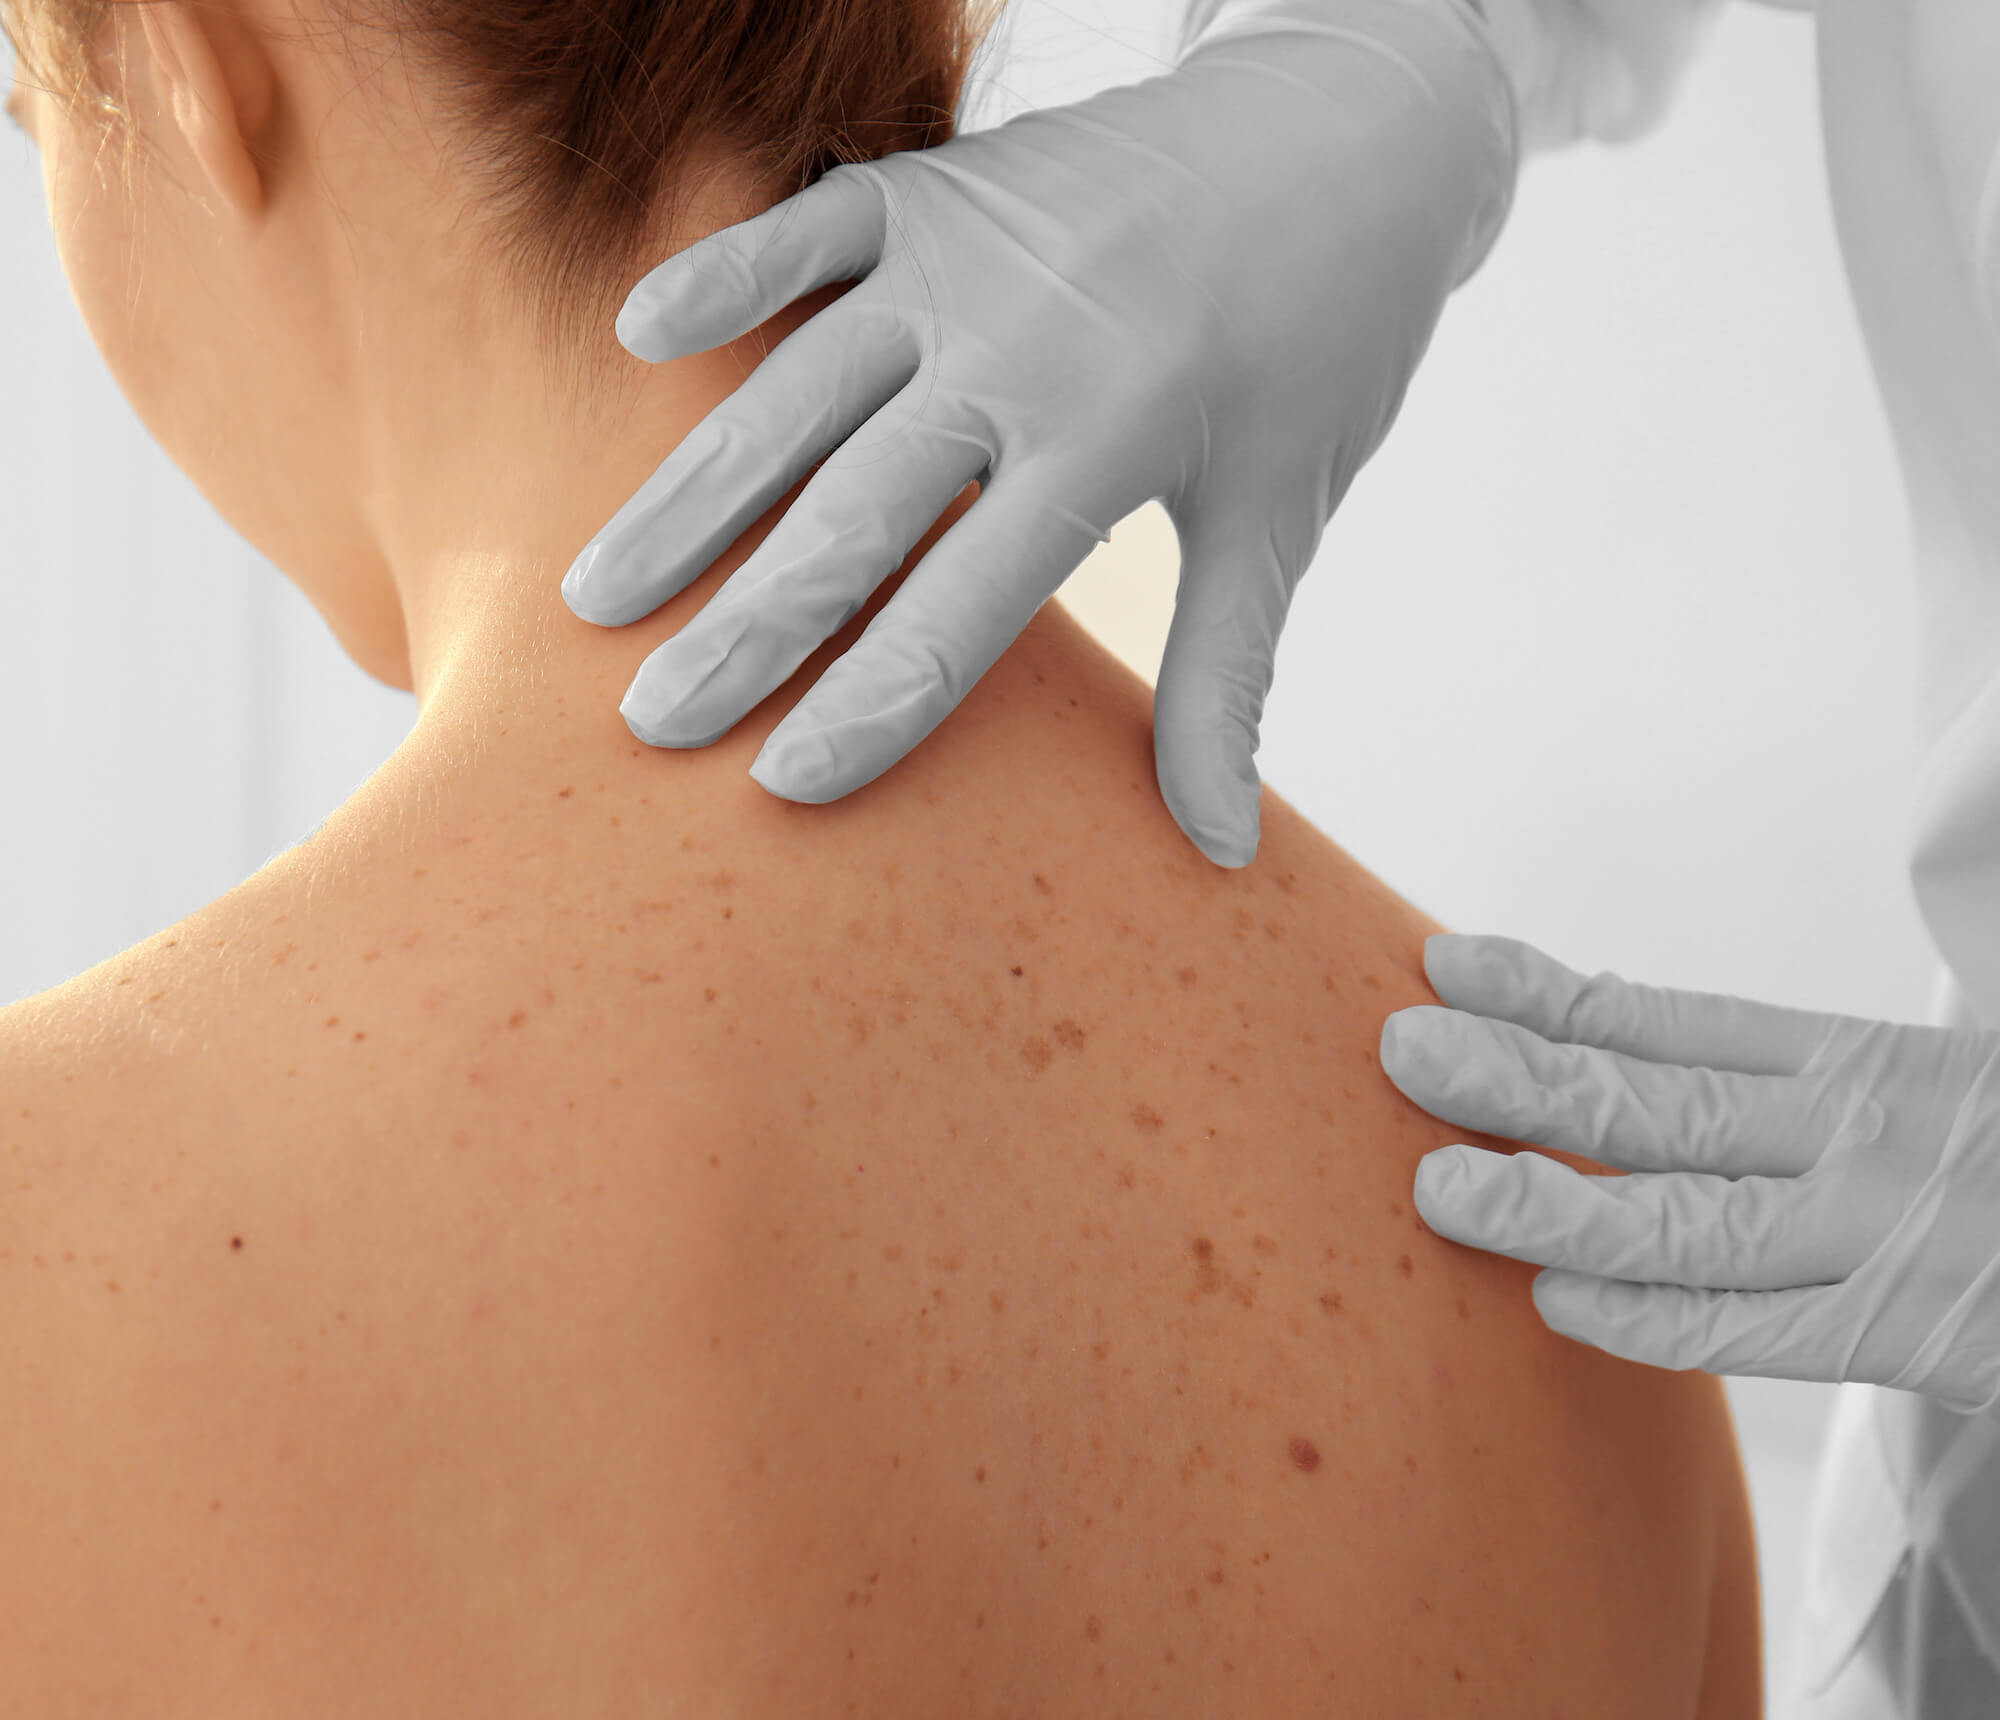 Photo of a woman's back being checked for skin cancer